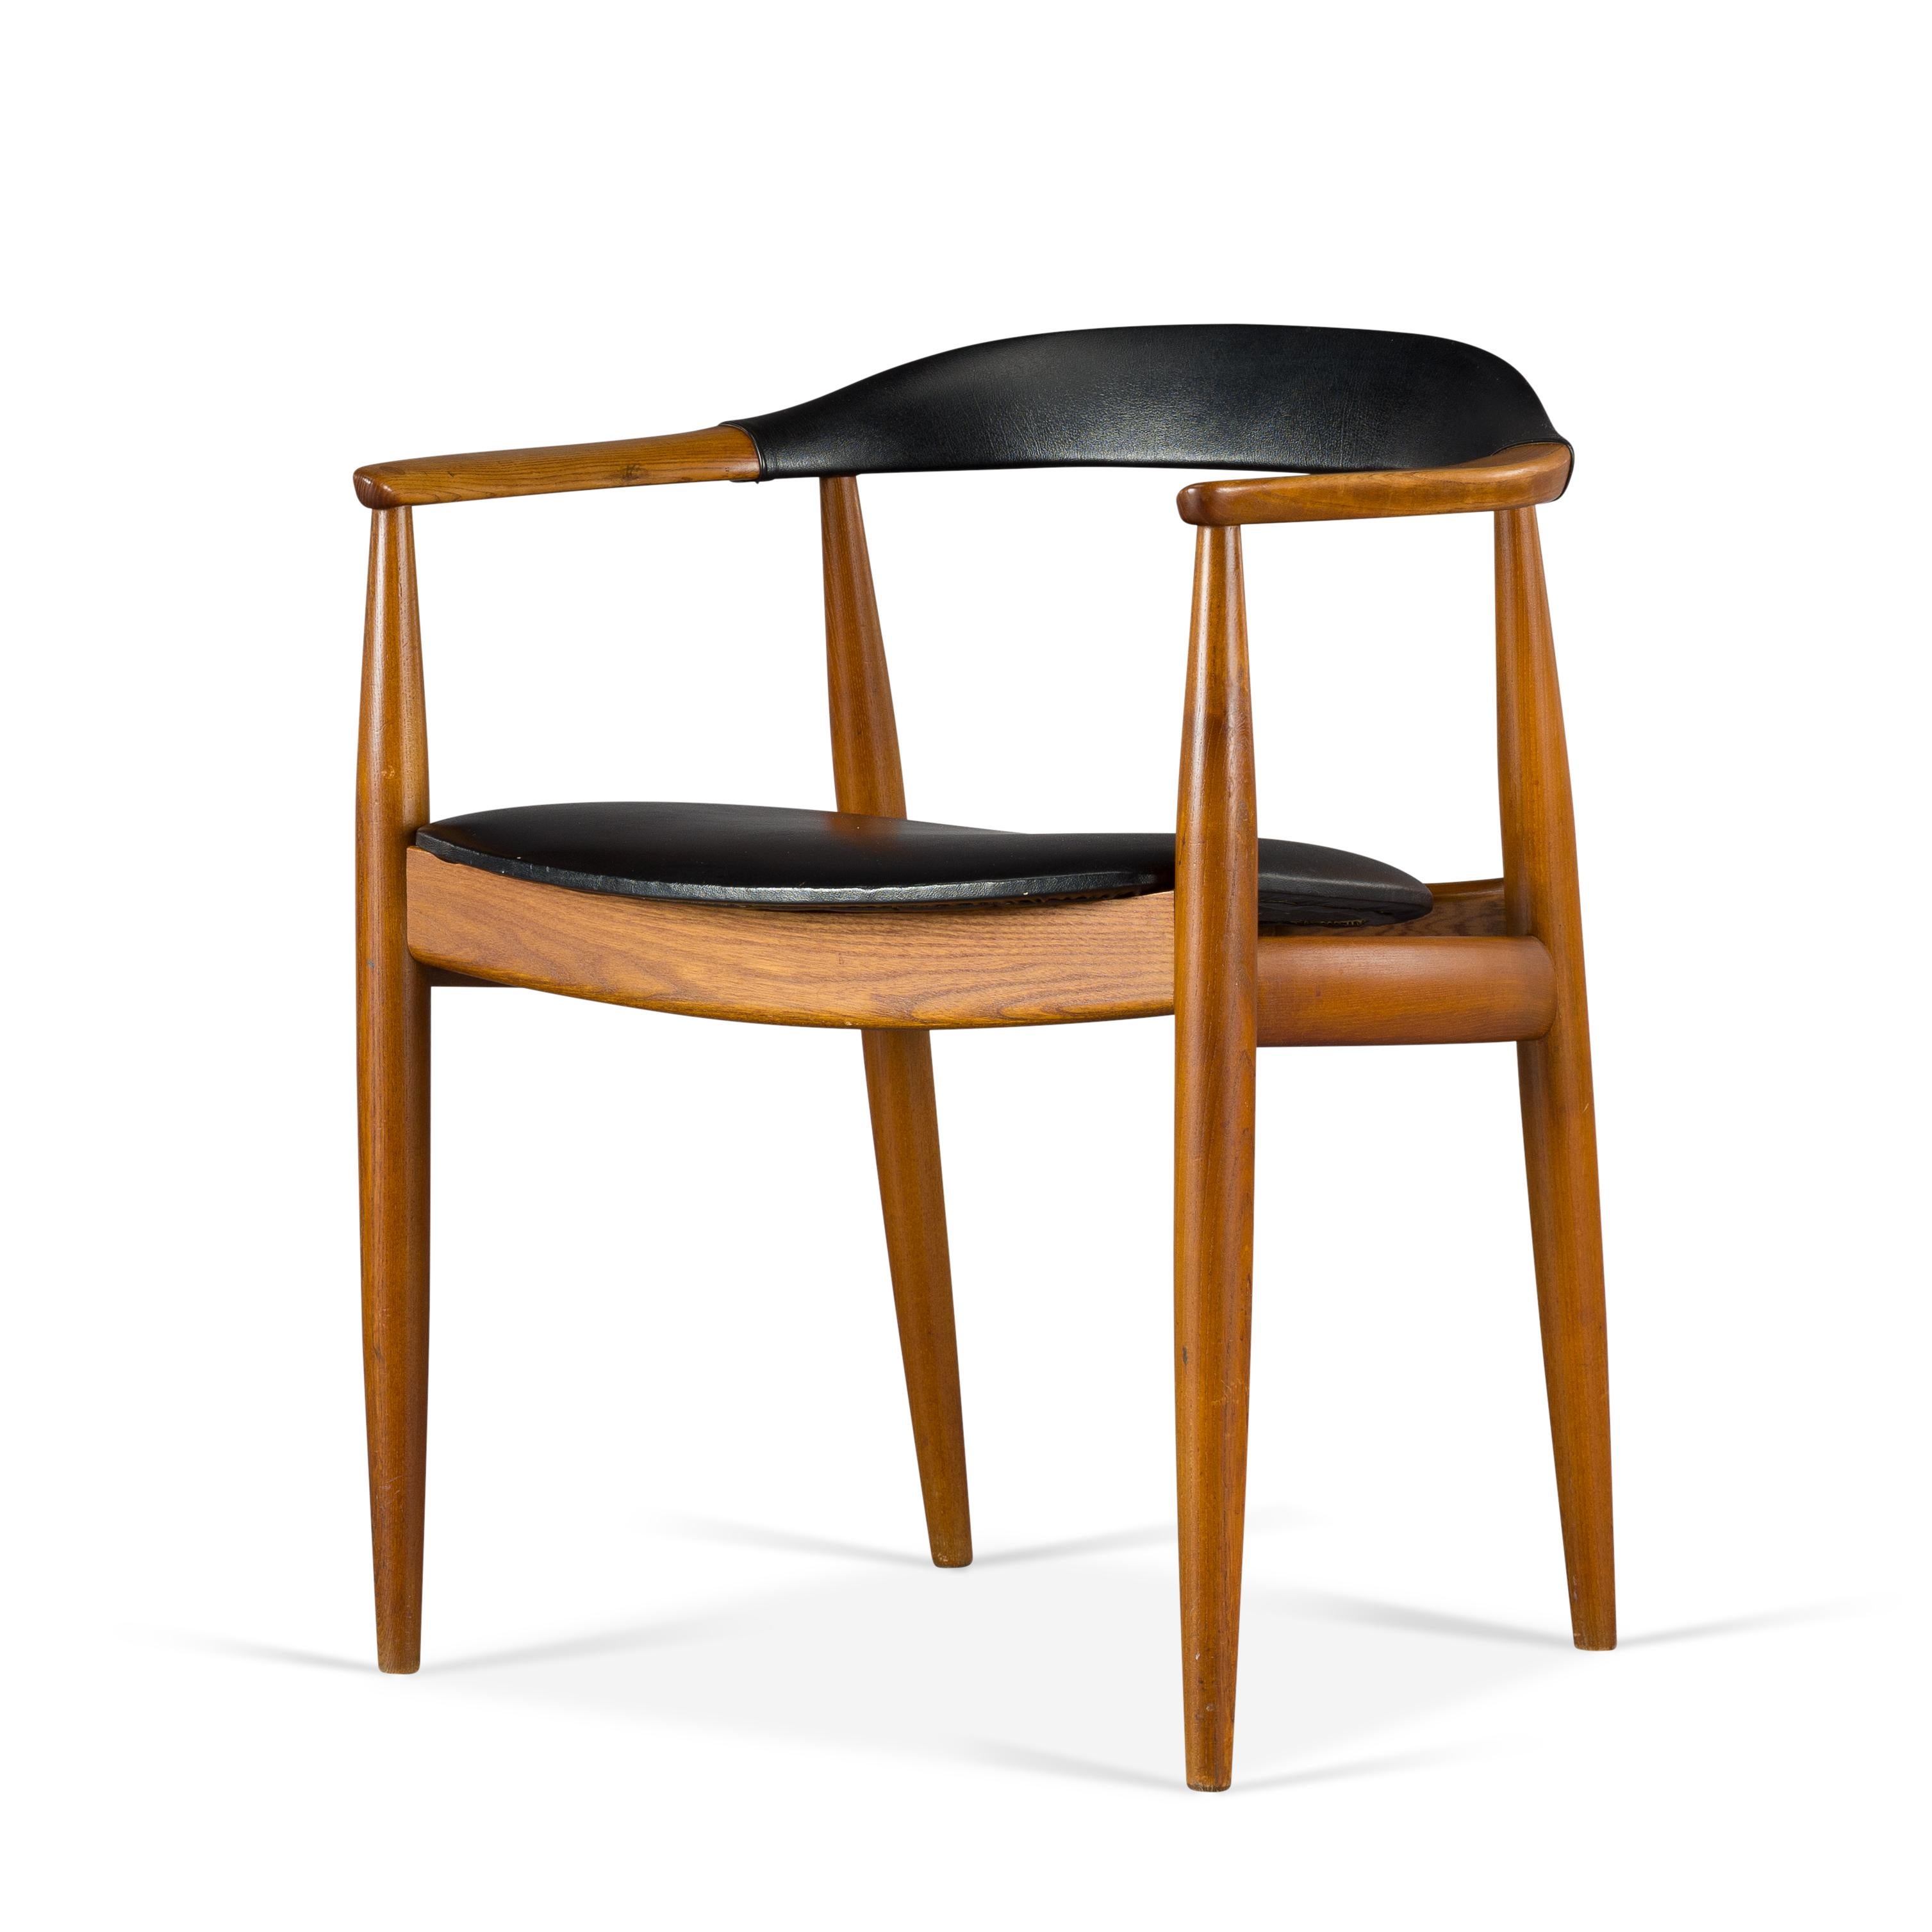 Designed by Illum Wikkelsø this chair is instantaneously recognisable as an Niels Eilersen. Producer Eilersen was proficient in steam bending of wood and made the back of the chair and armrests in one piece of elm wood. This chair is also referred